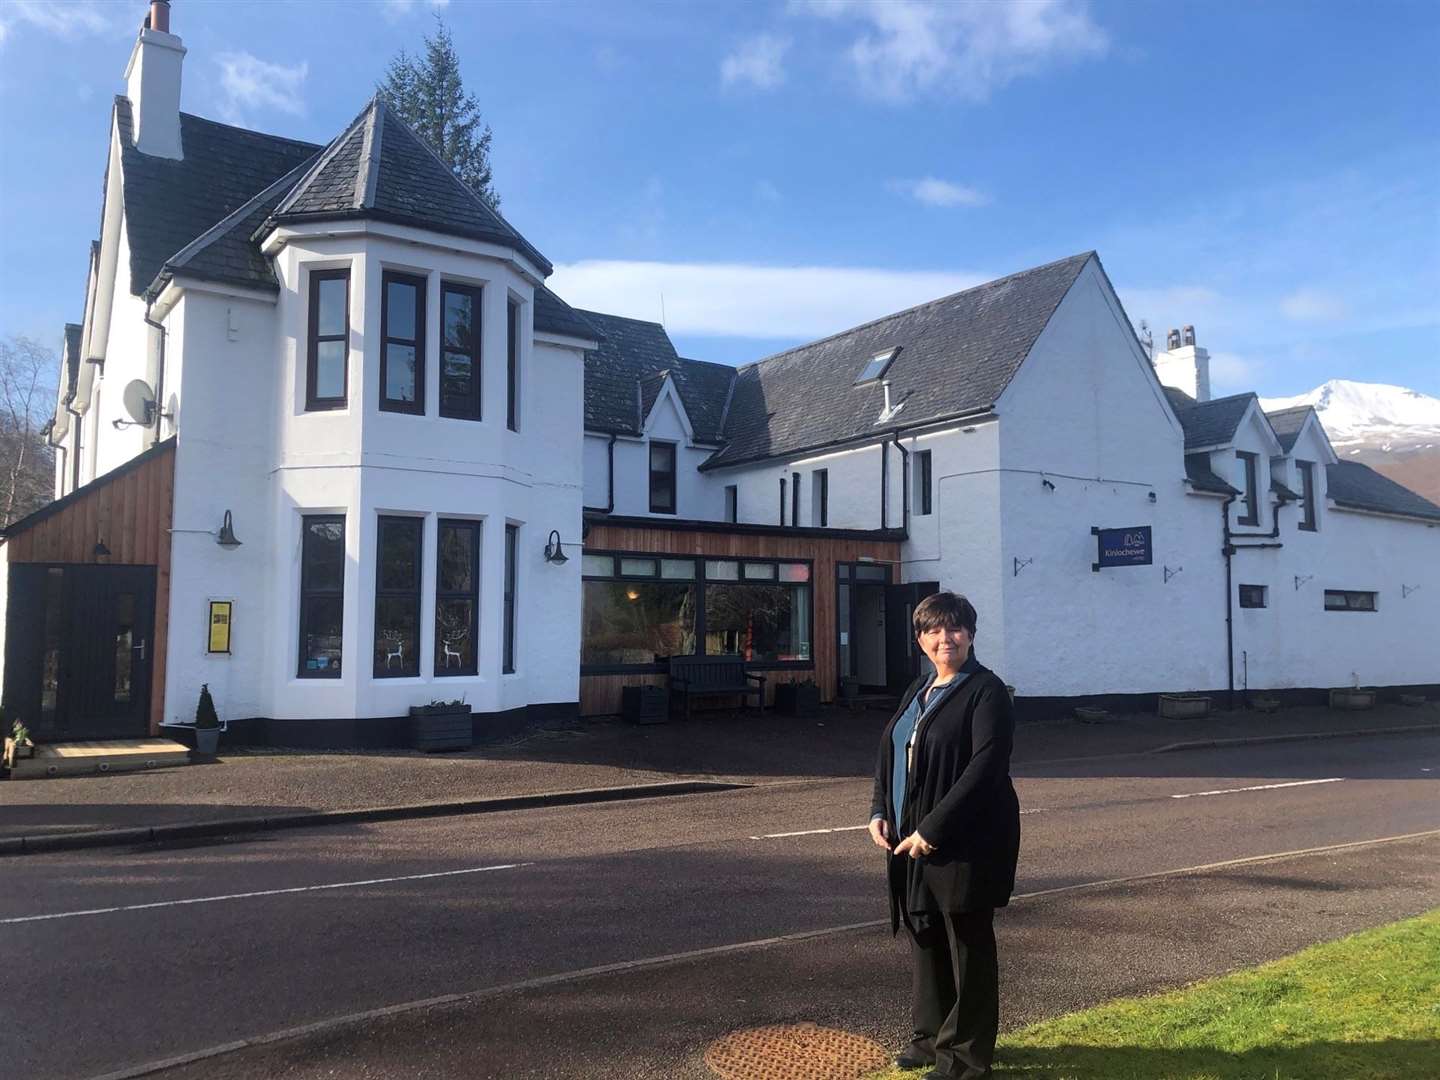 Kinlochewe Hotel owner Karen Twist would welcome the award after a tough time during the pandemic.